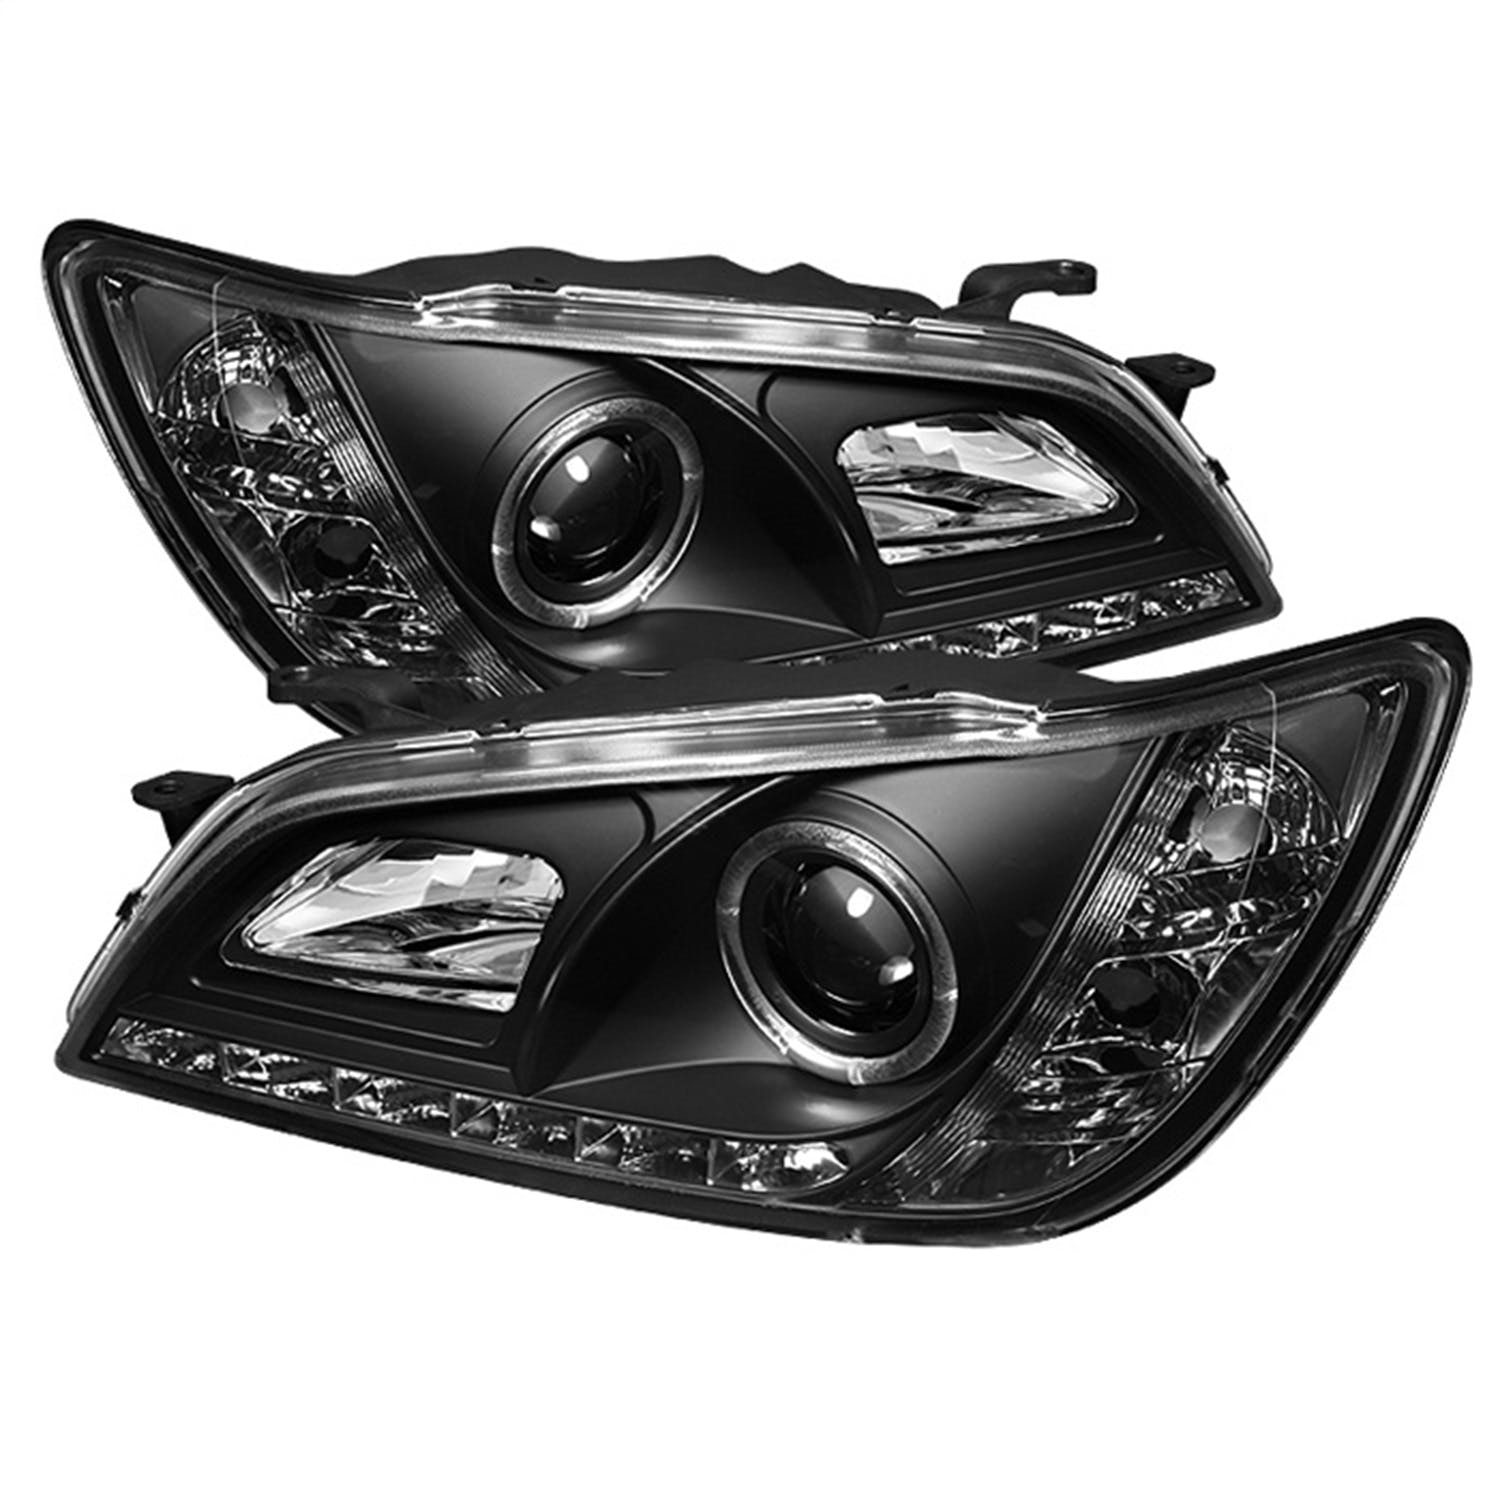 Spyder Auto 5029898 (Spyder) Lexus IS300 01-05 Projector Headlights-Xenon/HID Model Only ( Not Compa